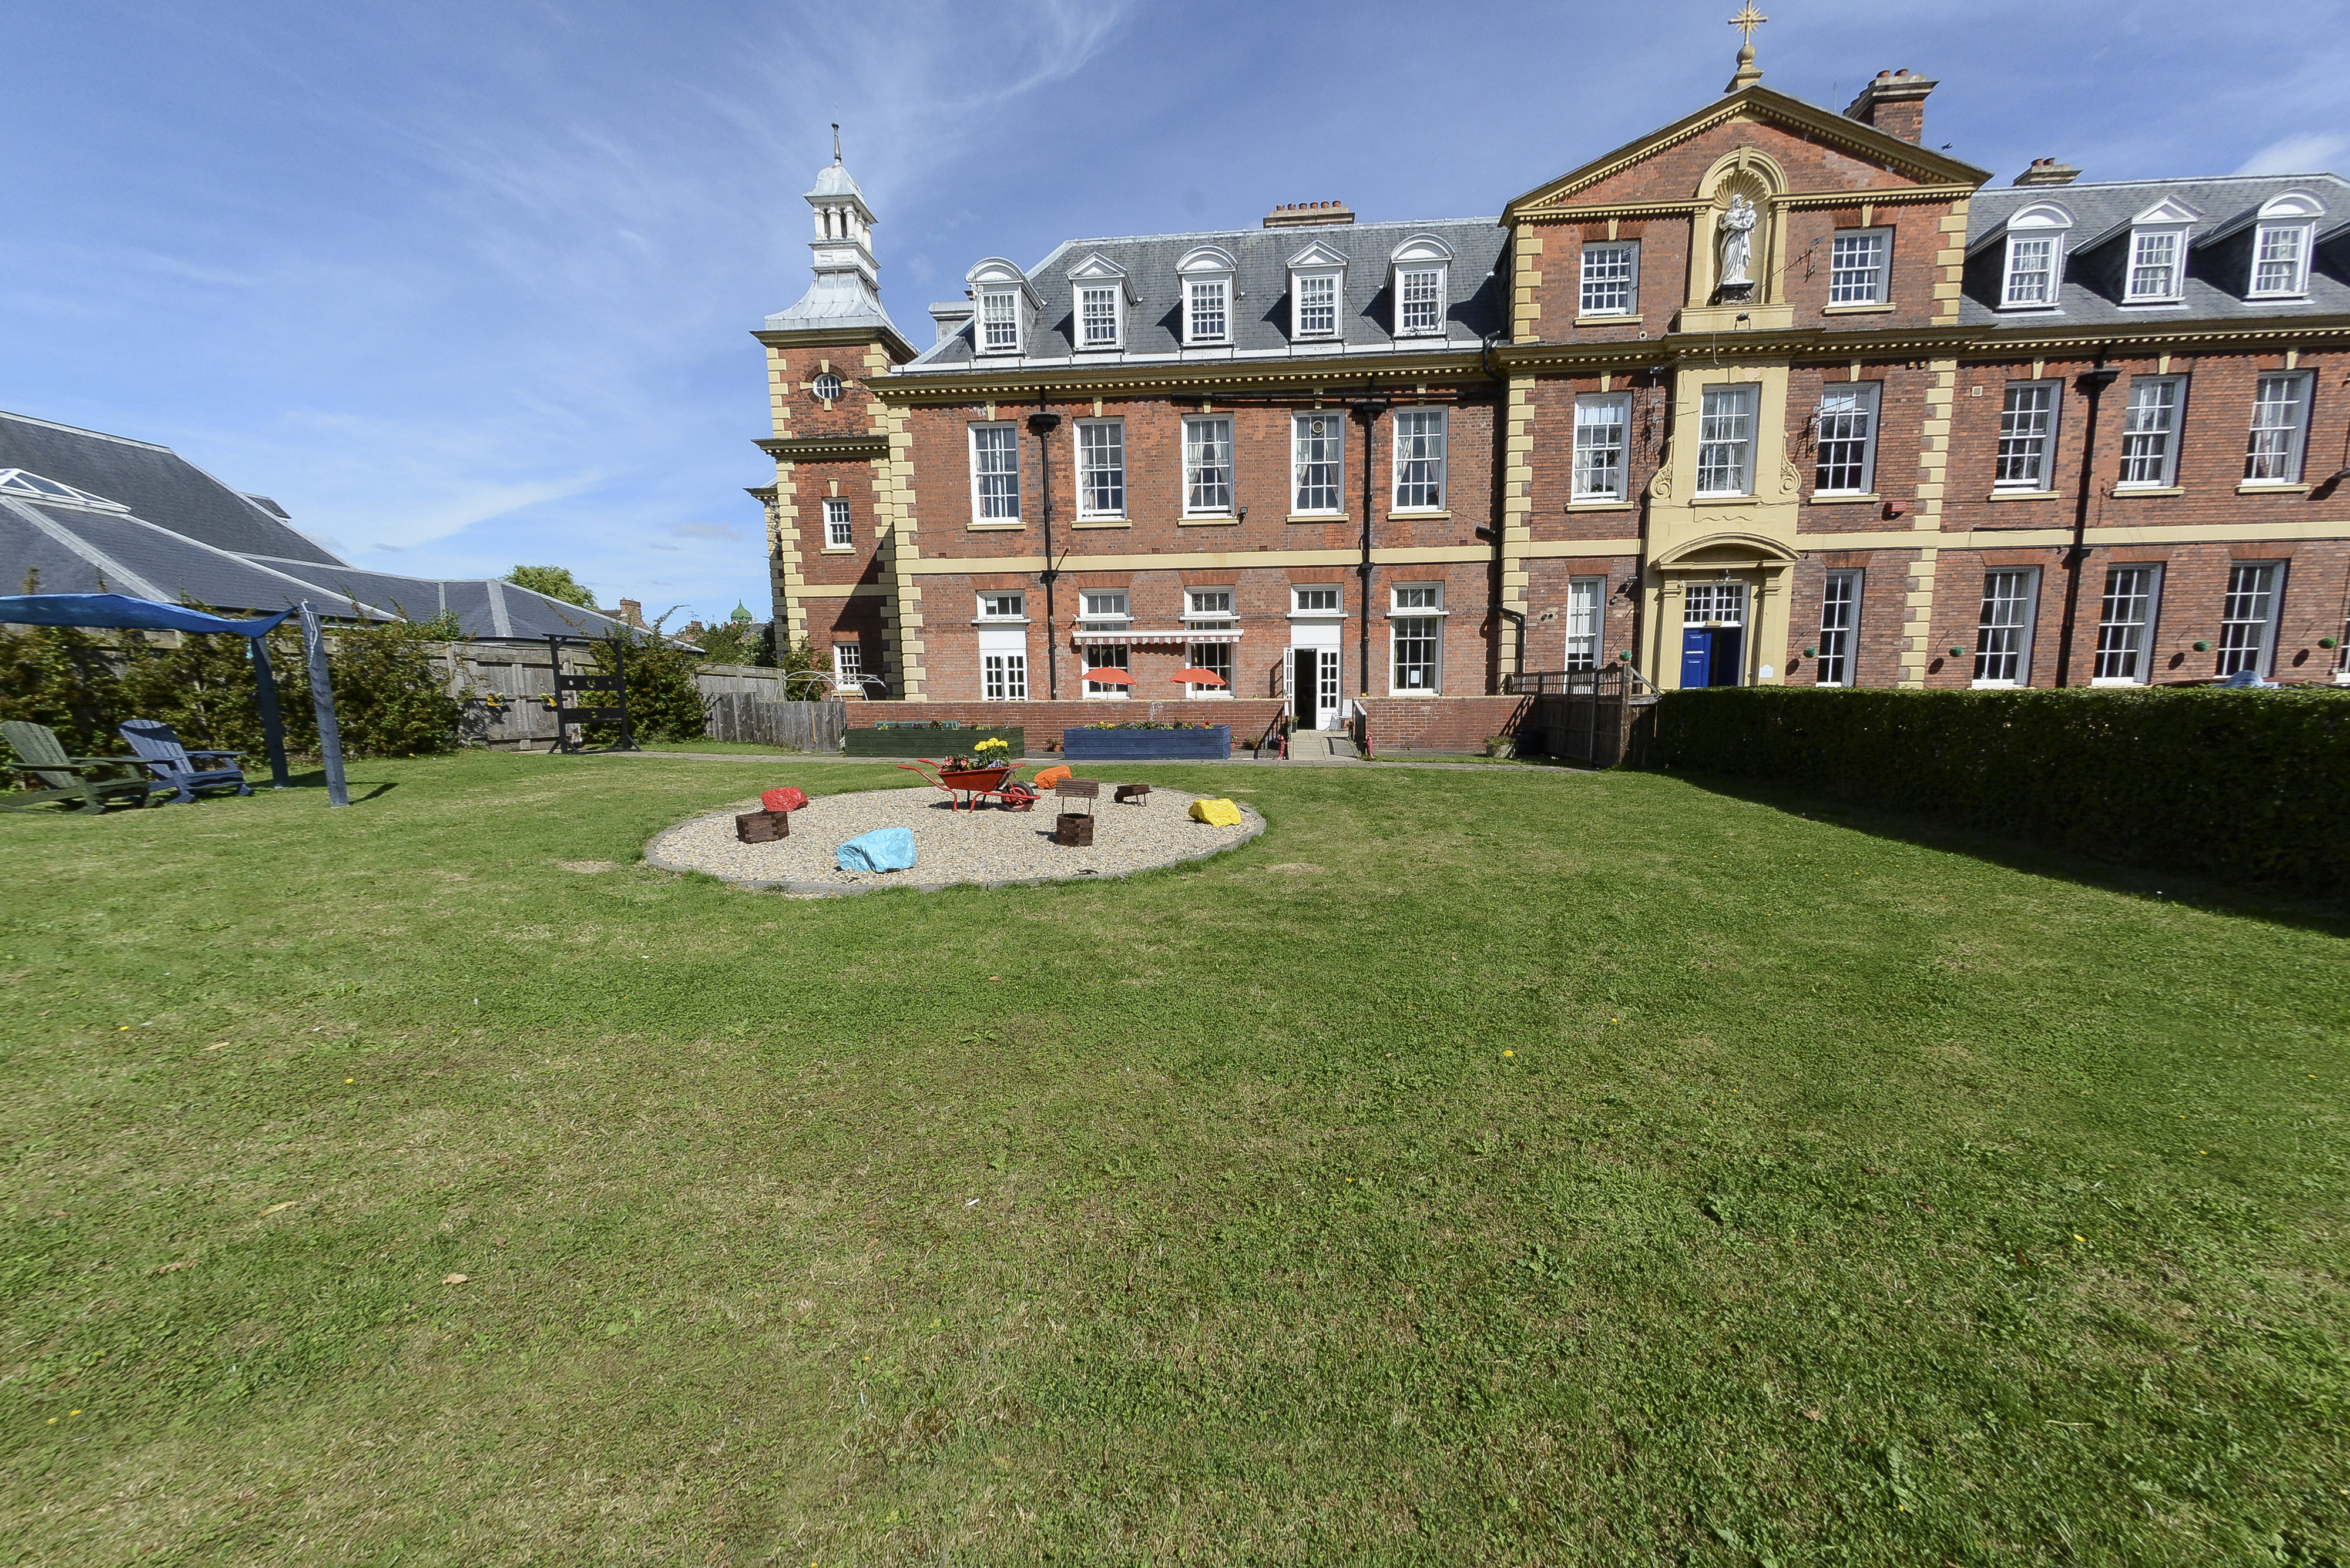 The Lawn: Key Healthcare is dedicated to caring for elderly residents in safe. We have multiple dementia care homes including our care home middlesbrough, our care home St. Helen and care home saltburn. We excel in monitoring and improving care levels.